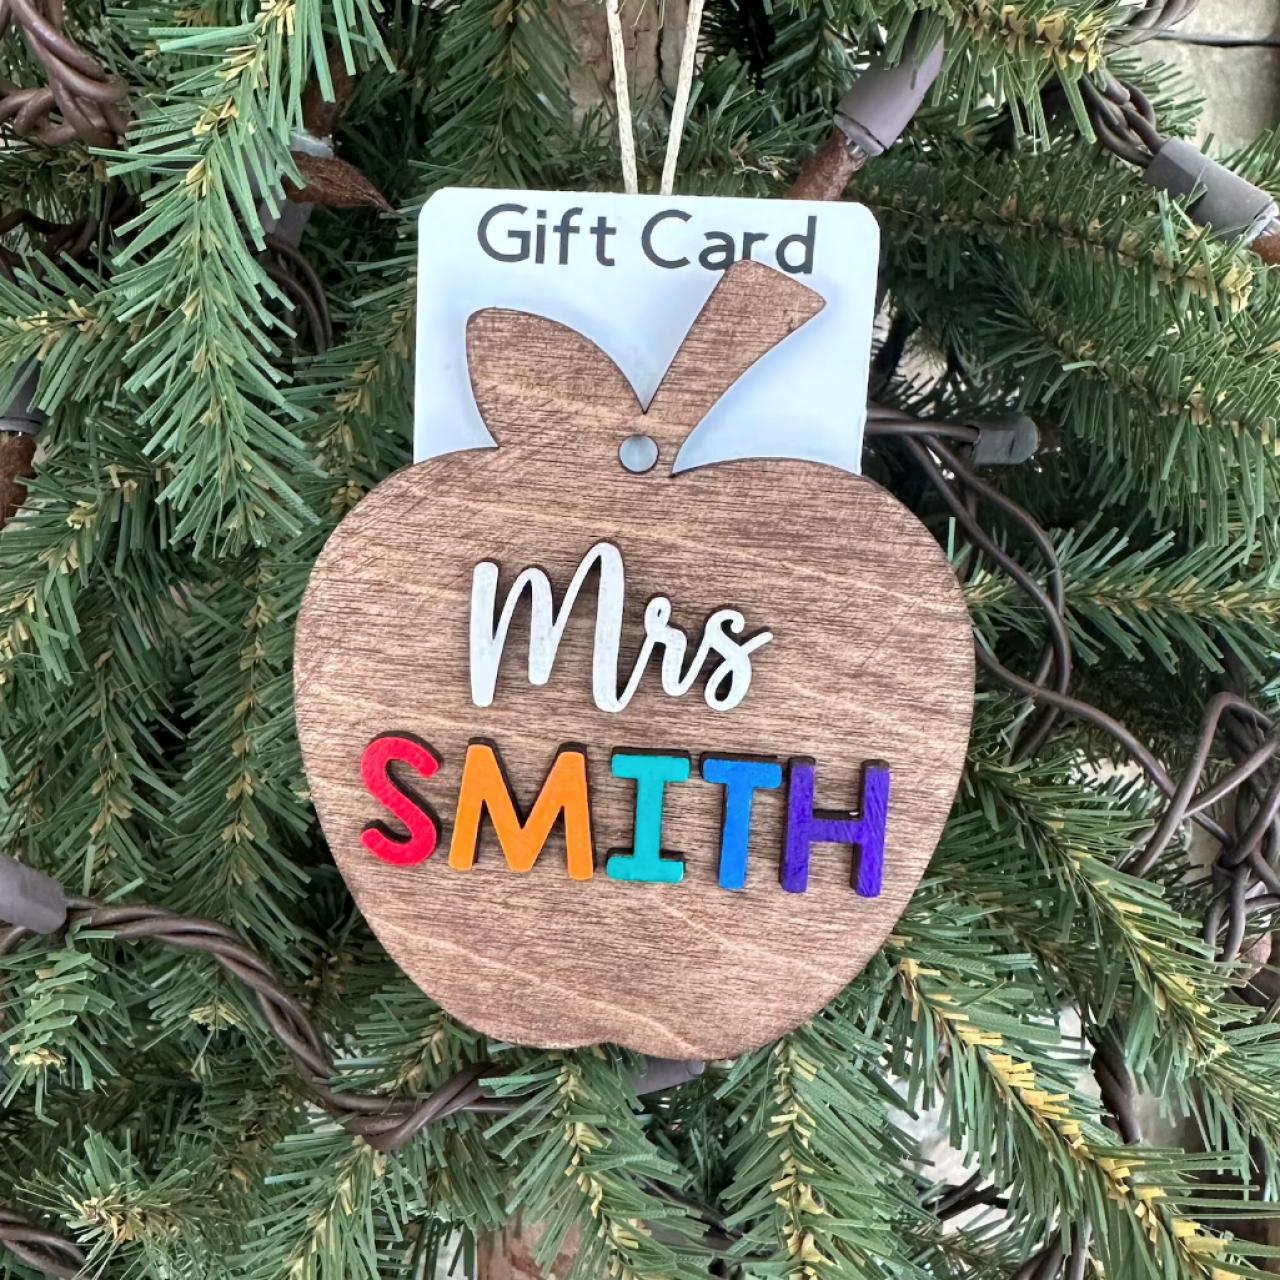 https://hgtvhome.sndimg.com/content/dam/images/hgtv/products/2022/11/22/rx_etsy_teacher-ornament-with-gift-card-holder-CROP.jpeg.rend.hgtvcom.1280.1280.suffix/1669153961407.jpeg